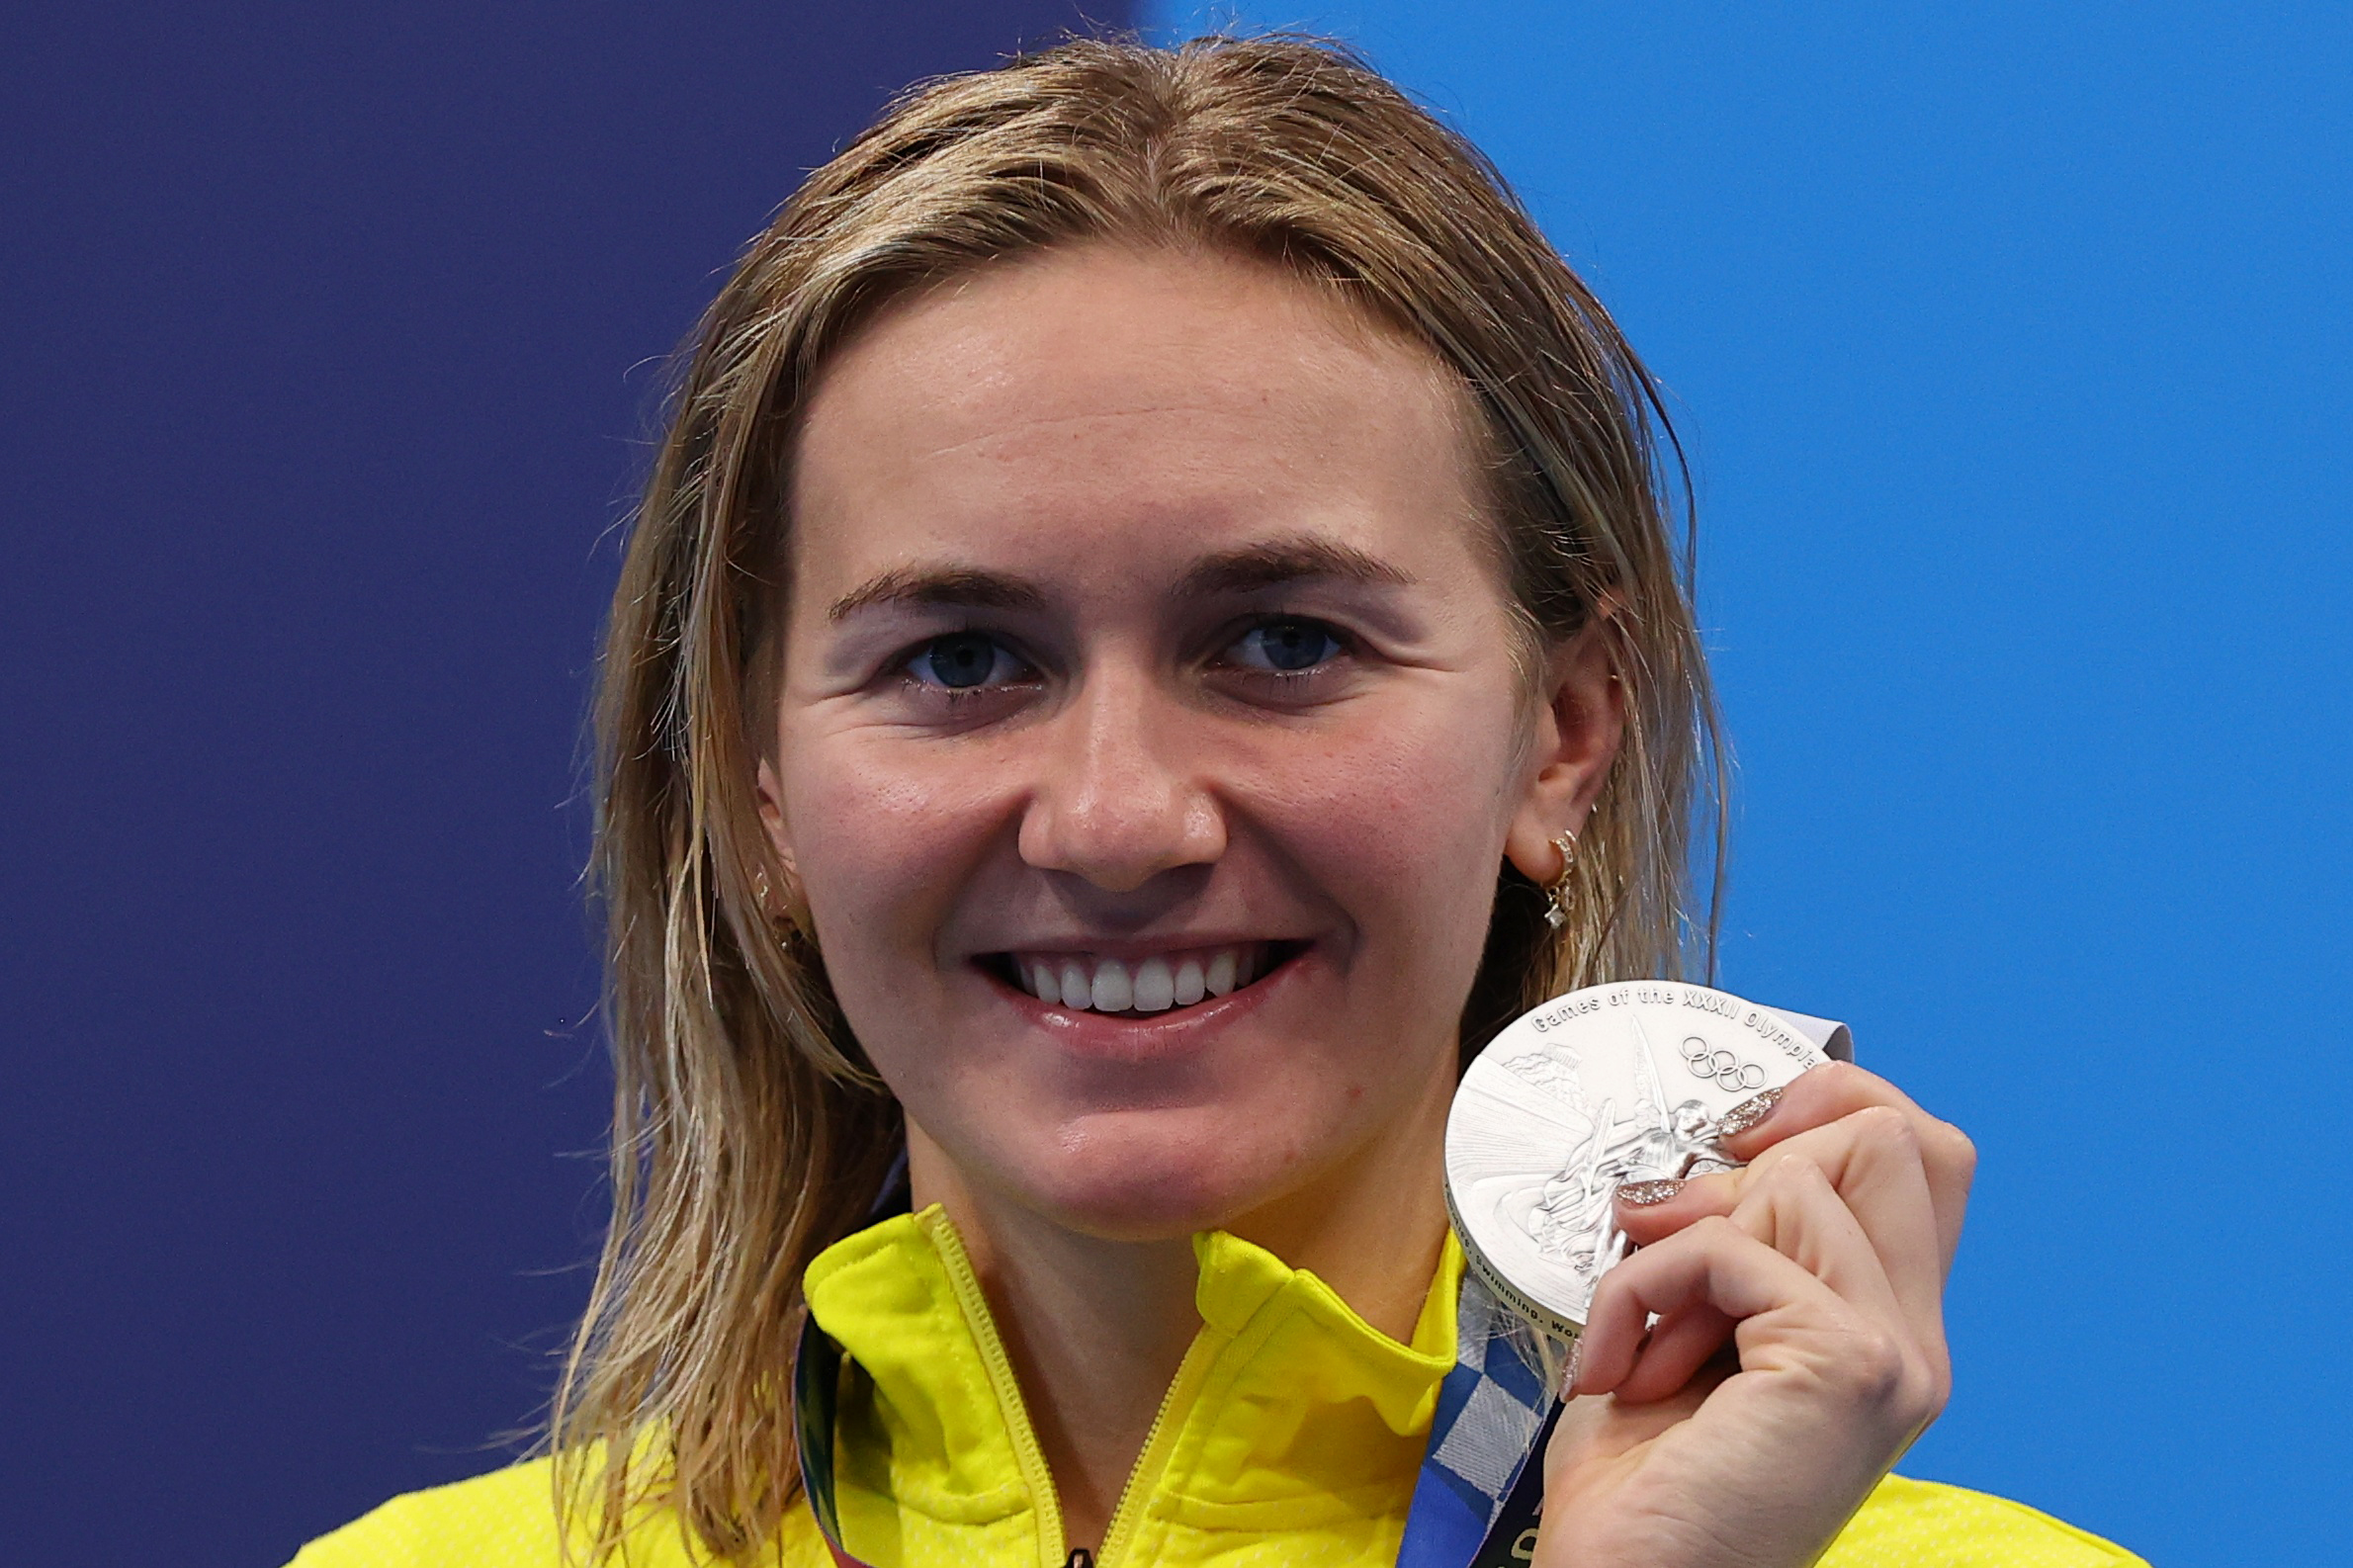 Swimming - Women's 800m Freestyle - Medal Ceremony